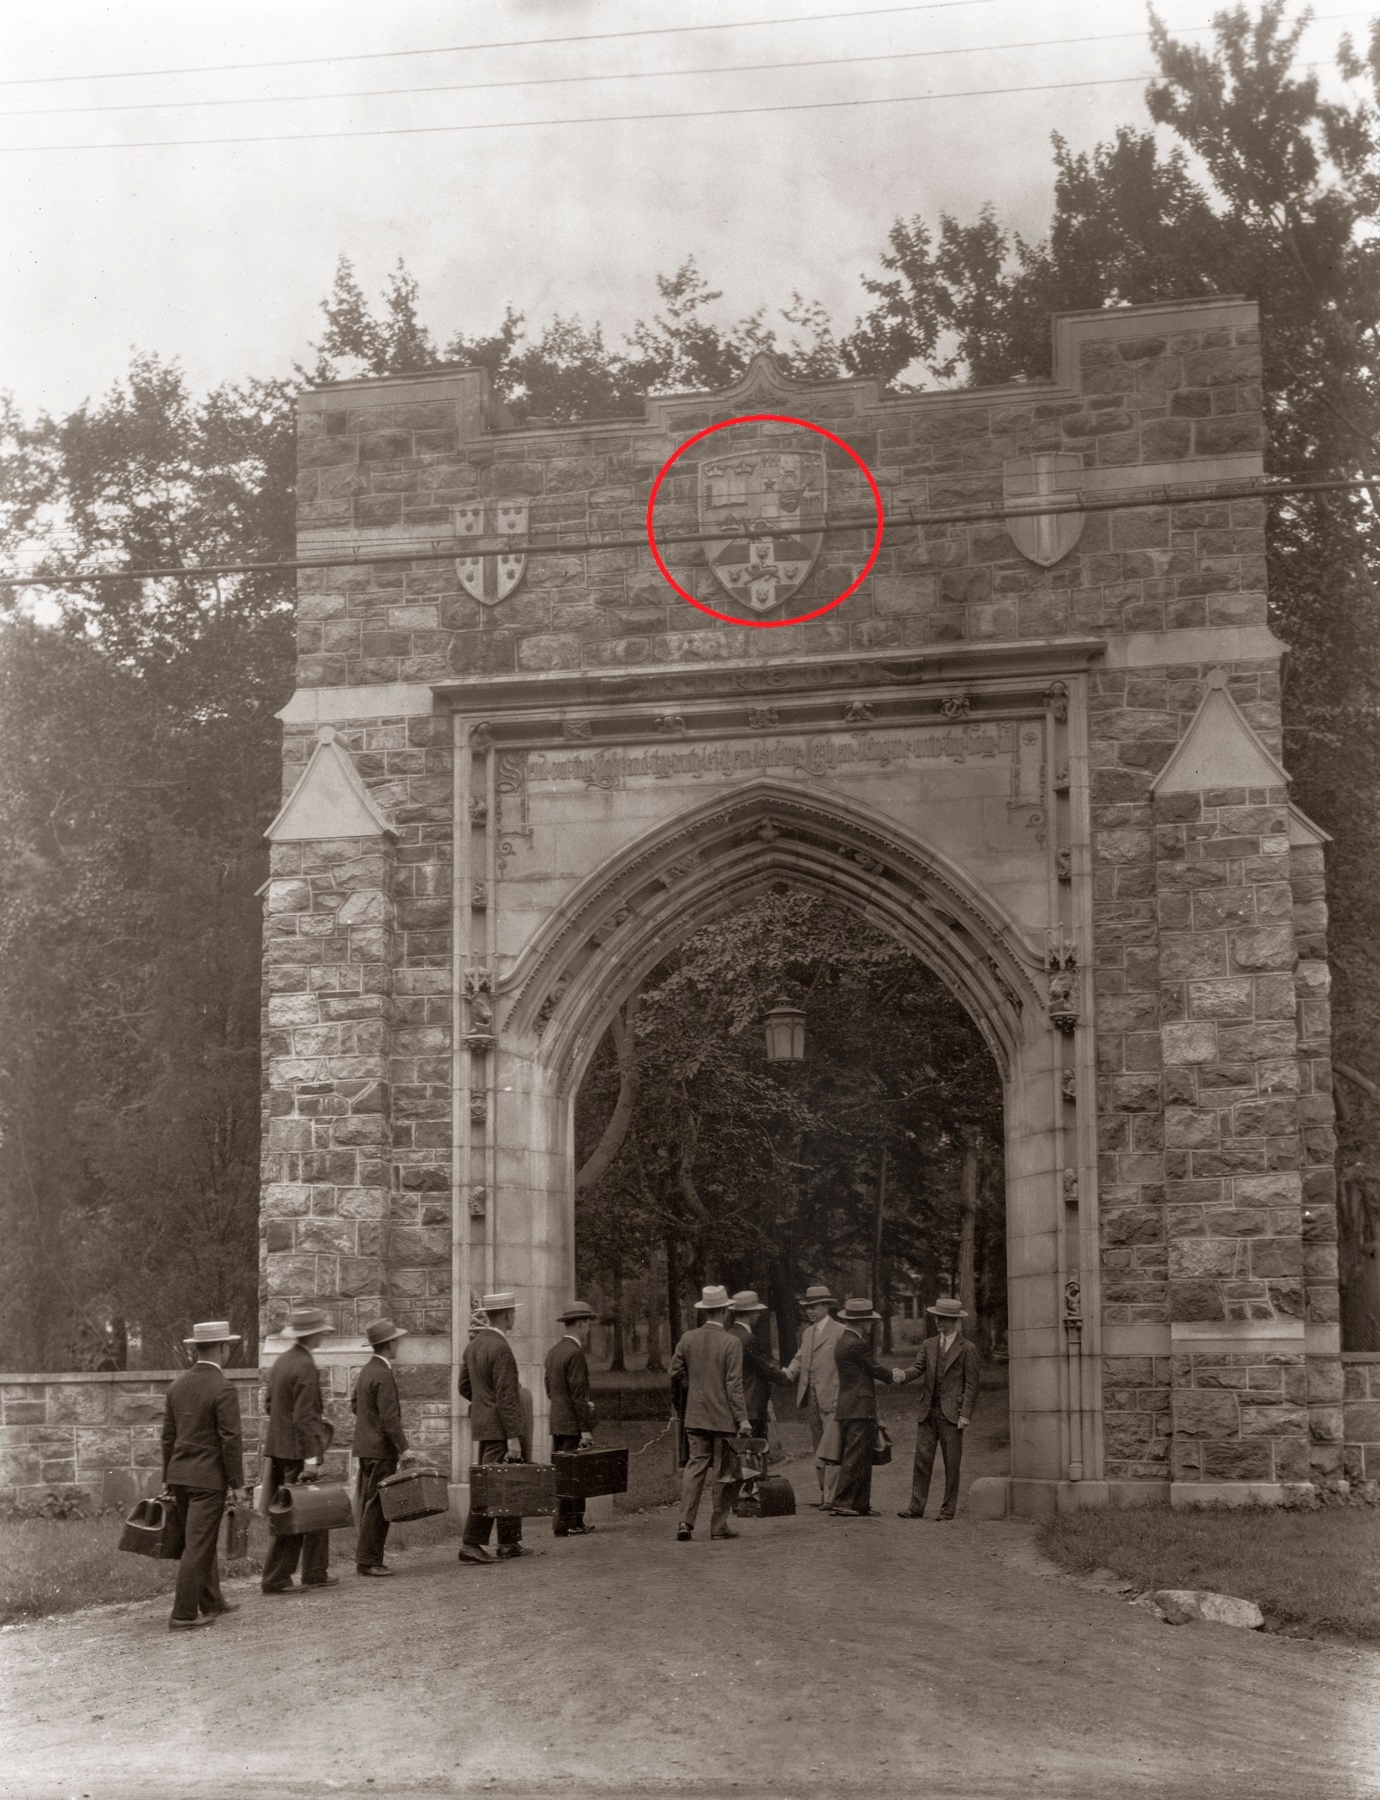 Samuel W. Bowne Gateway, c.1925 with Shield circled in red